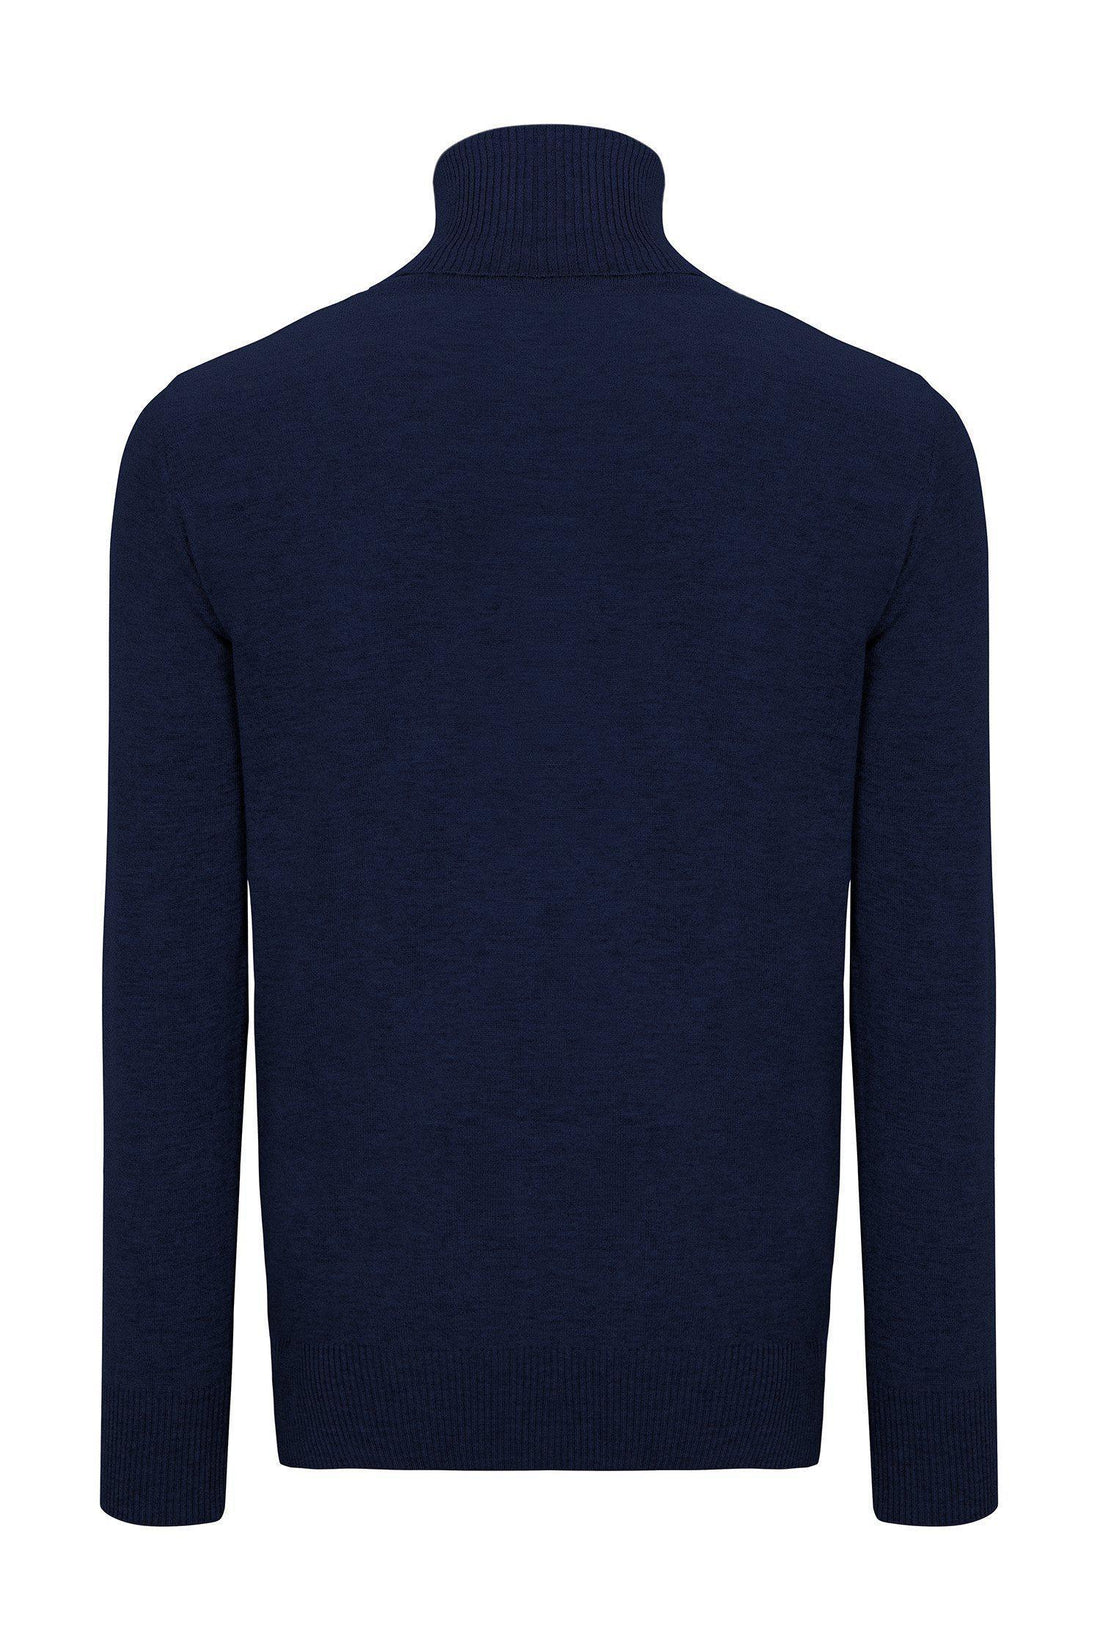 ROLLNECK SWEATER NAVY - Ron Tomson